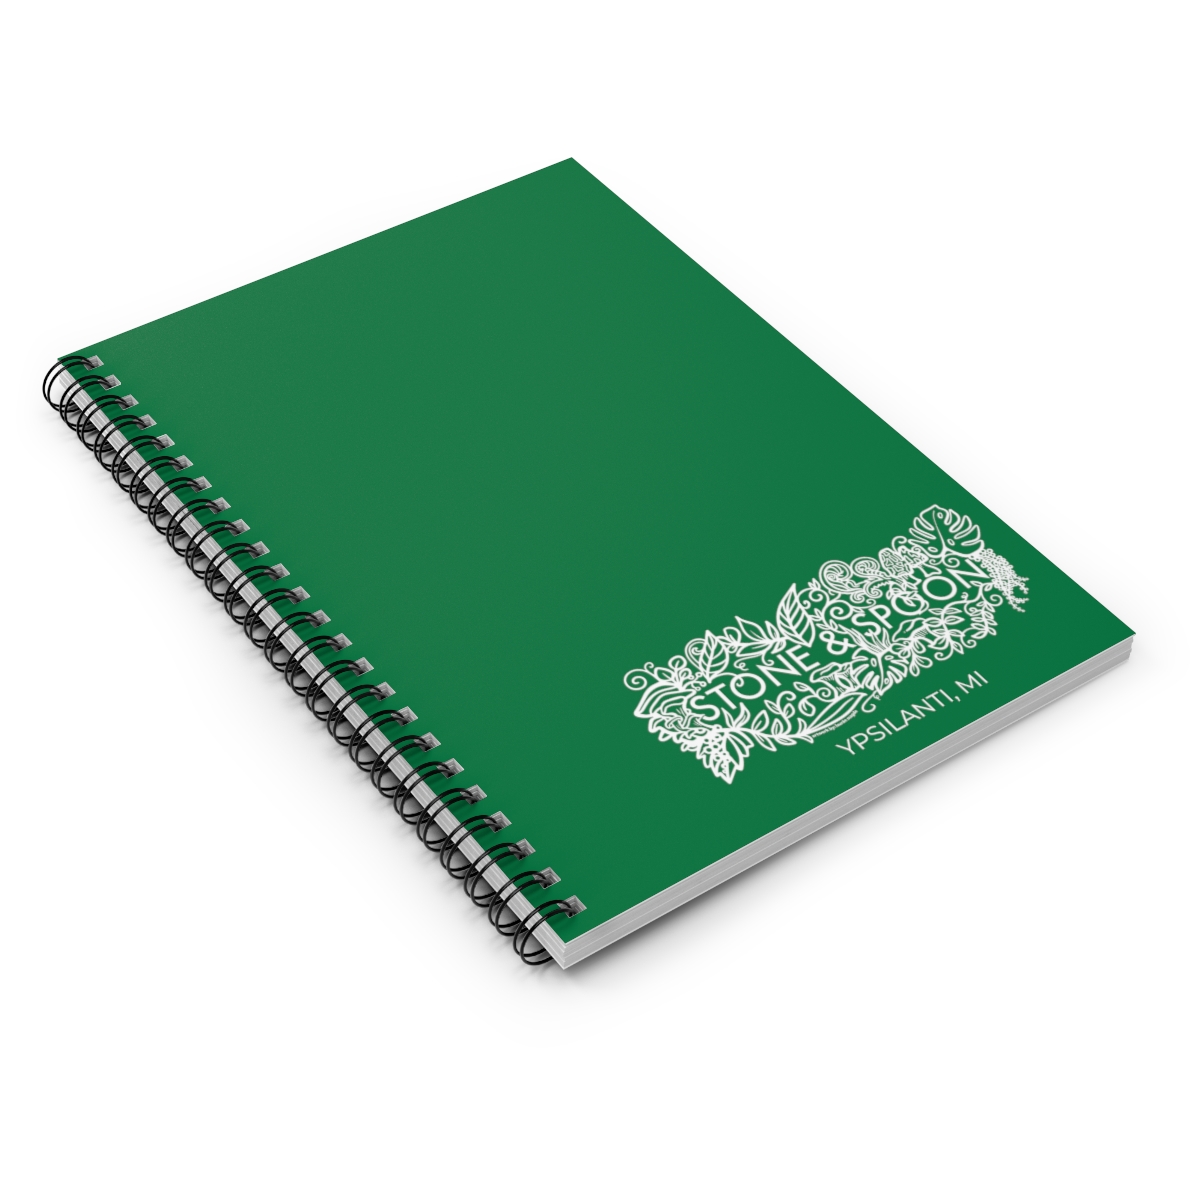 Stone & Spoon "Ypsi" Spiral Notebook - Ruled Line product thumbnail image